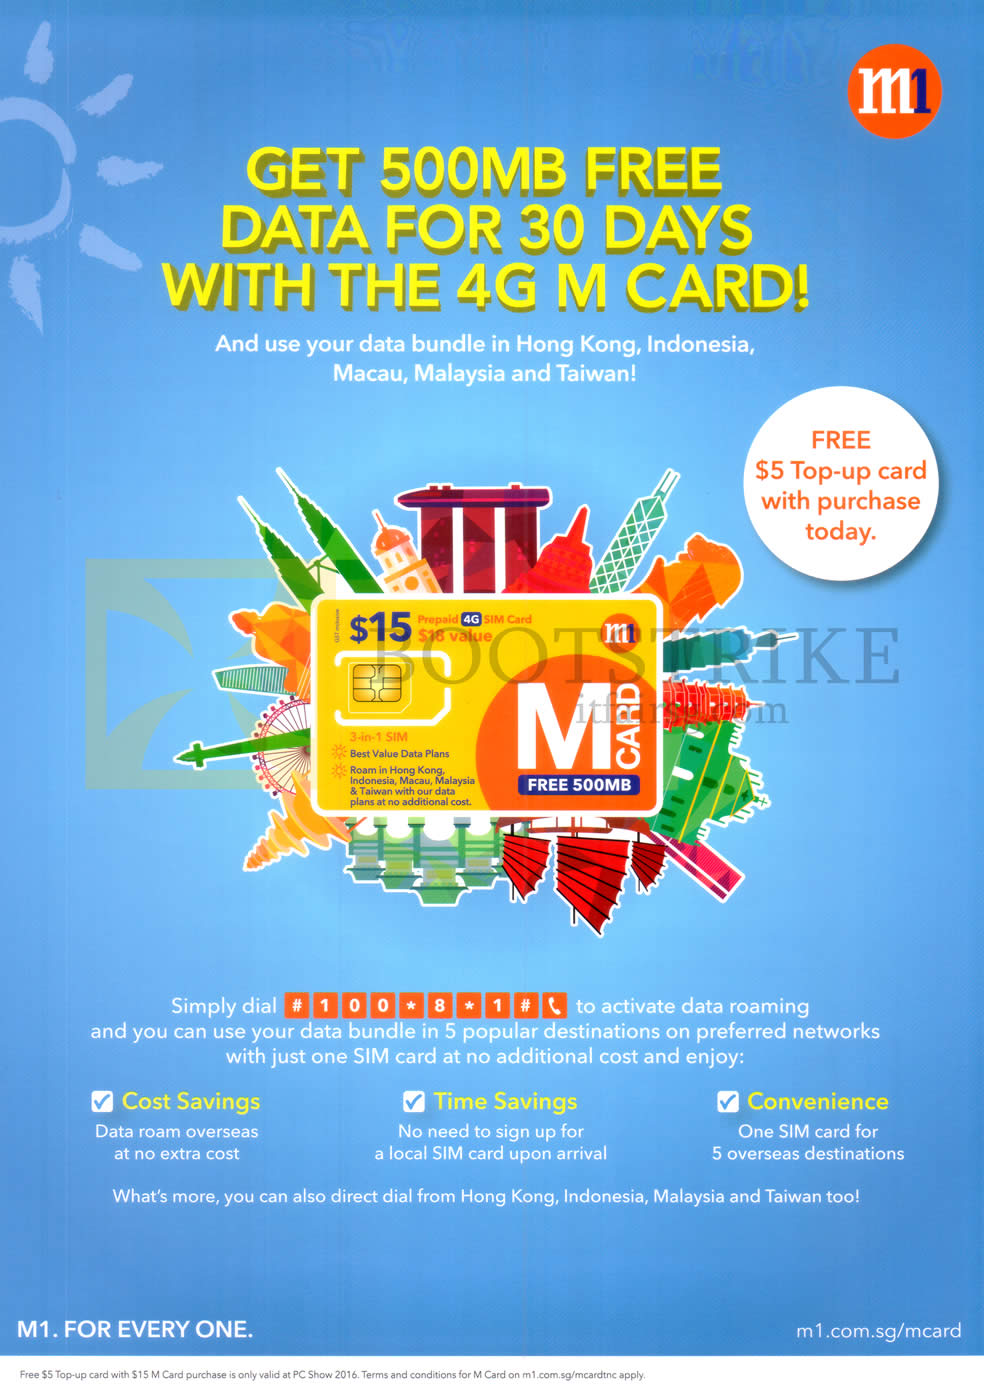 PC SHOW 2016 price list image brochure of M1 Prepaid 500MB Free Data With SIM Card Purchase